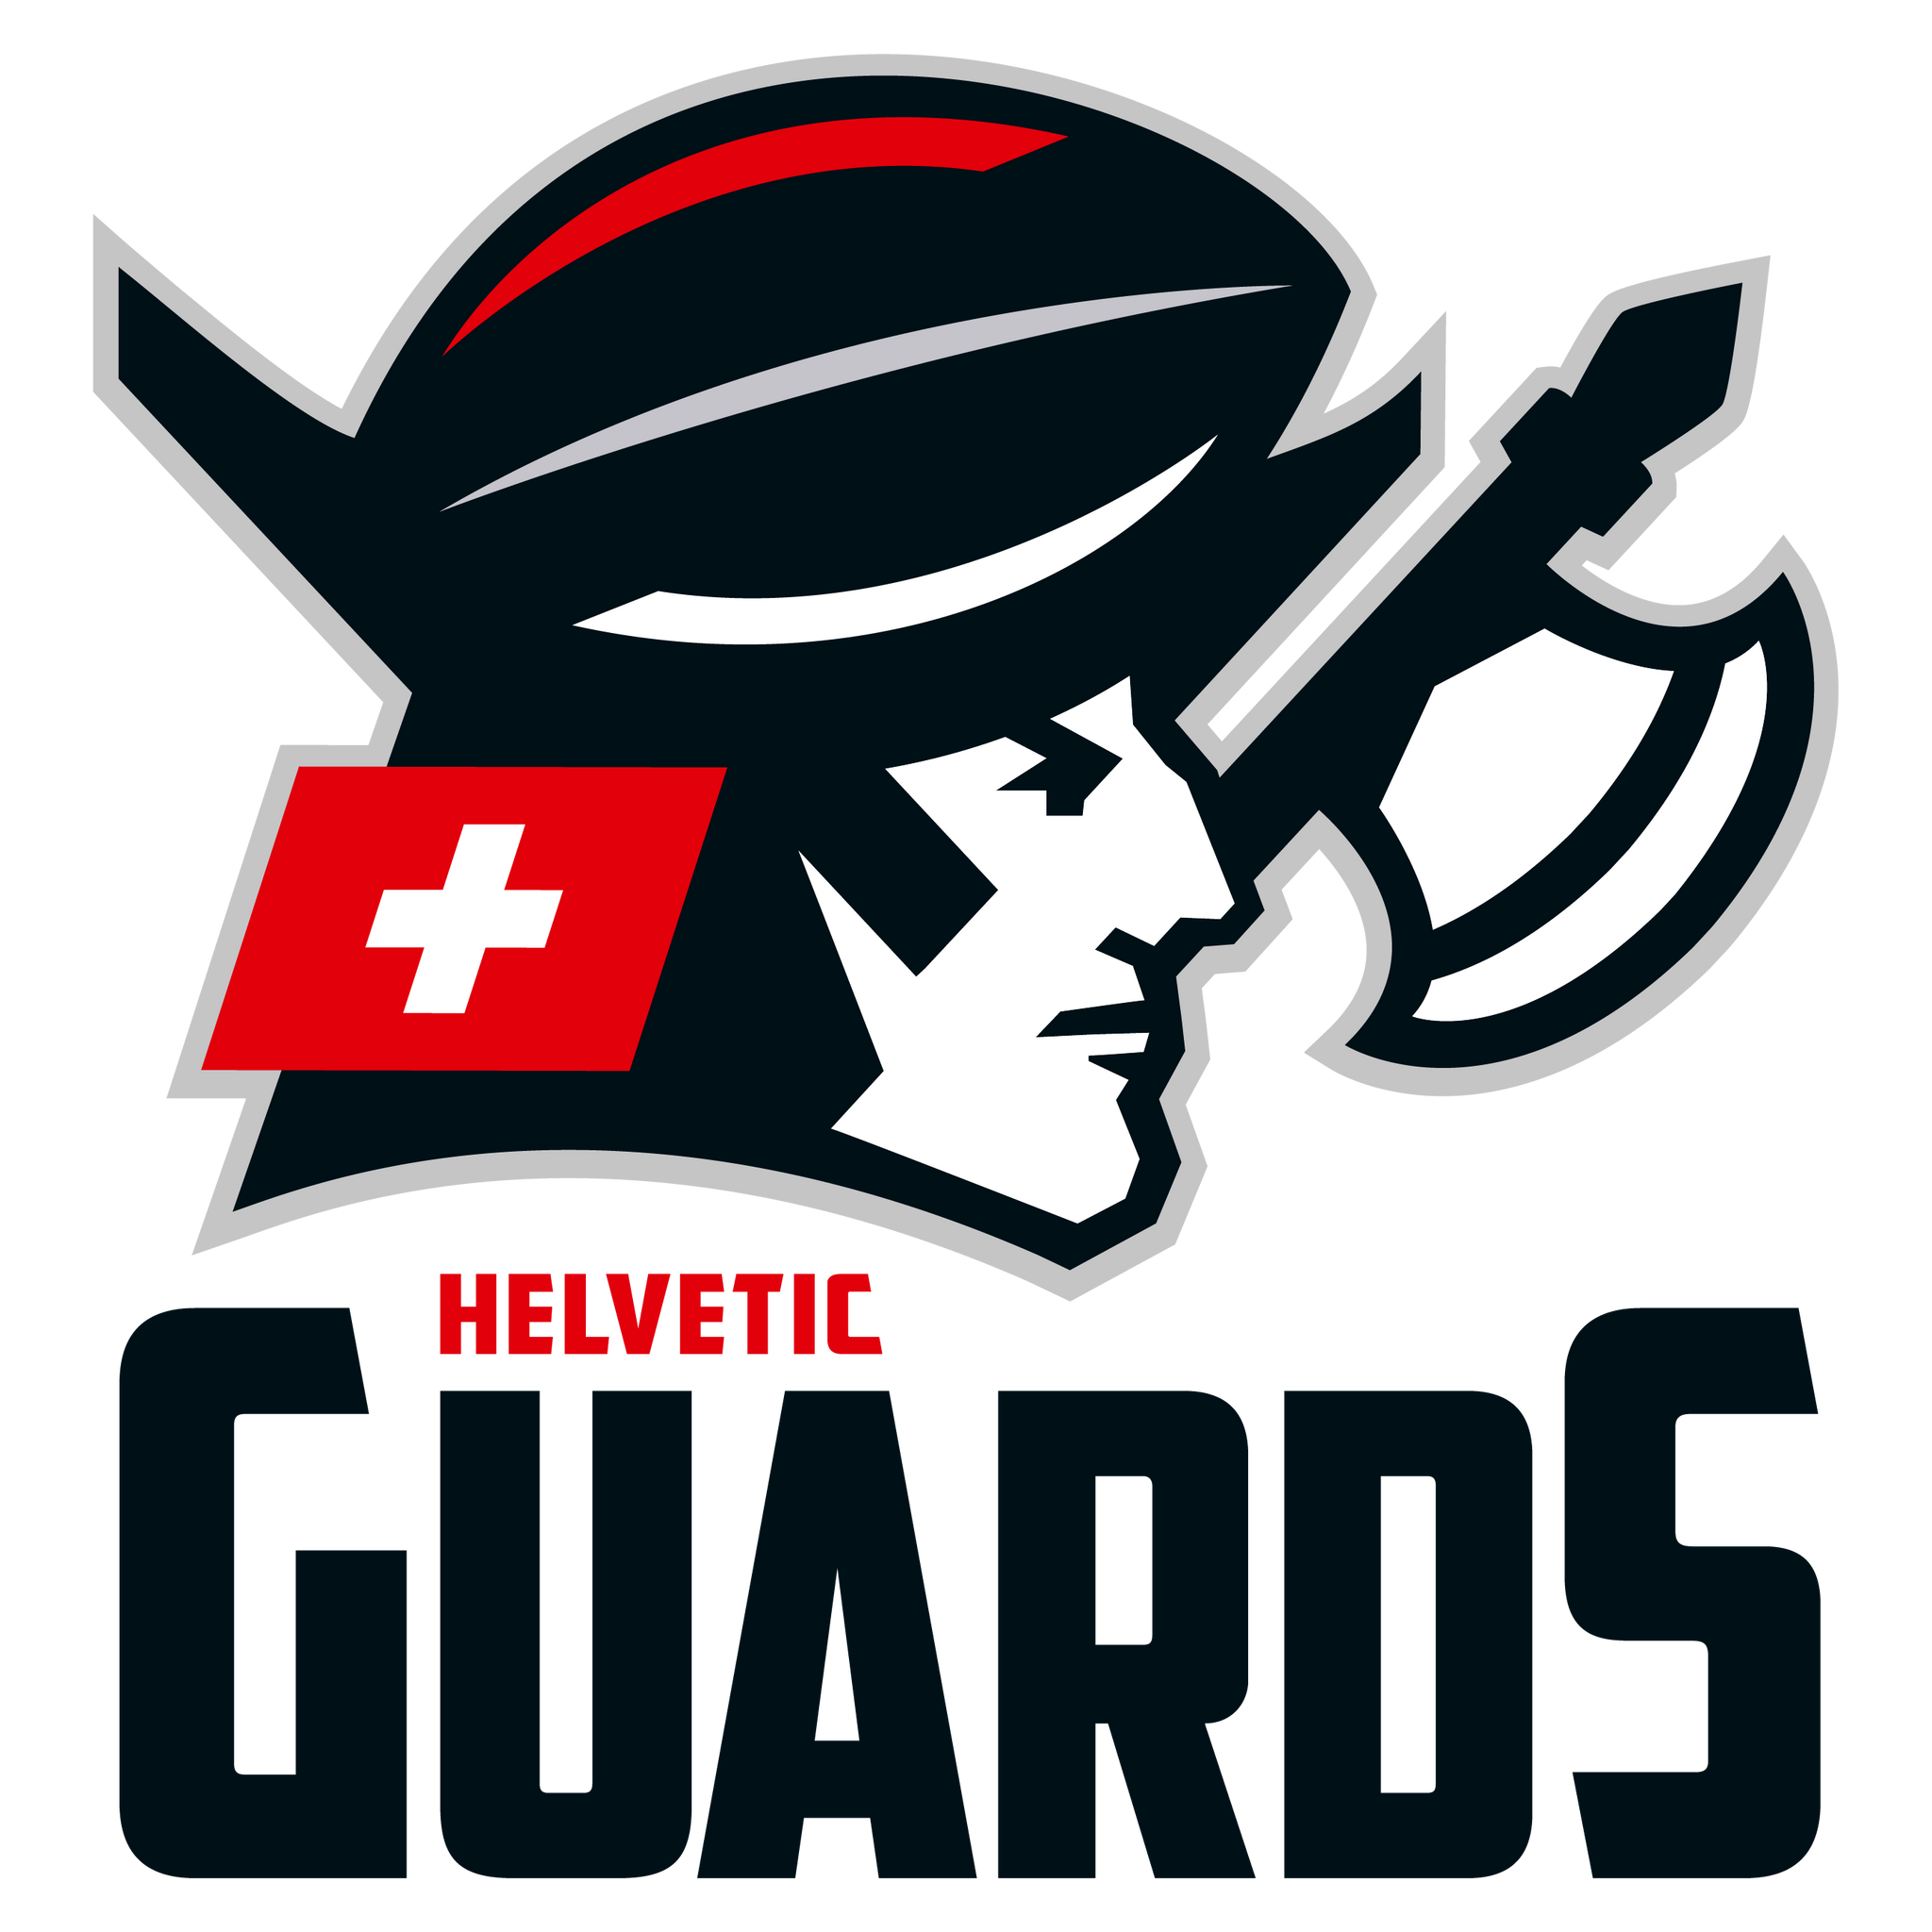 Helvetic Guards